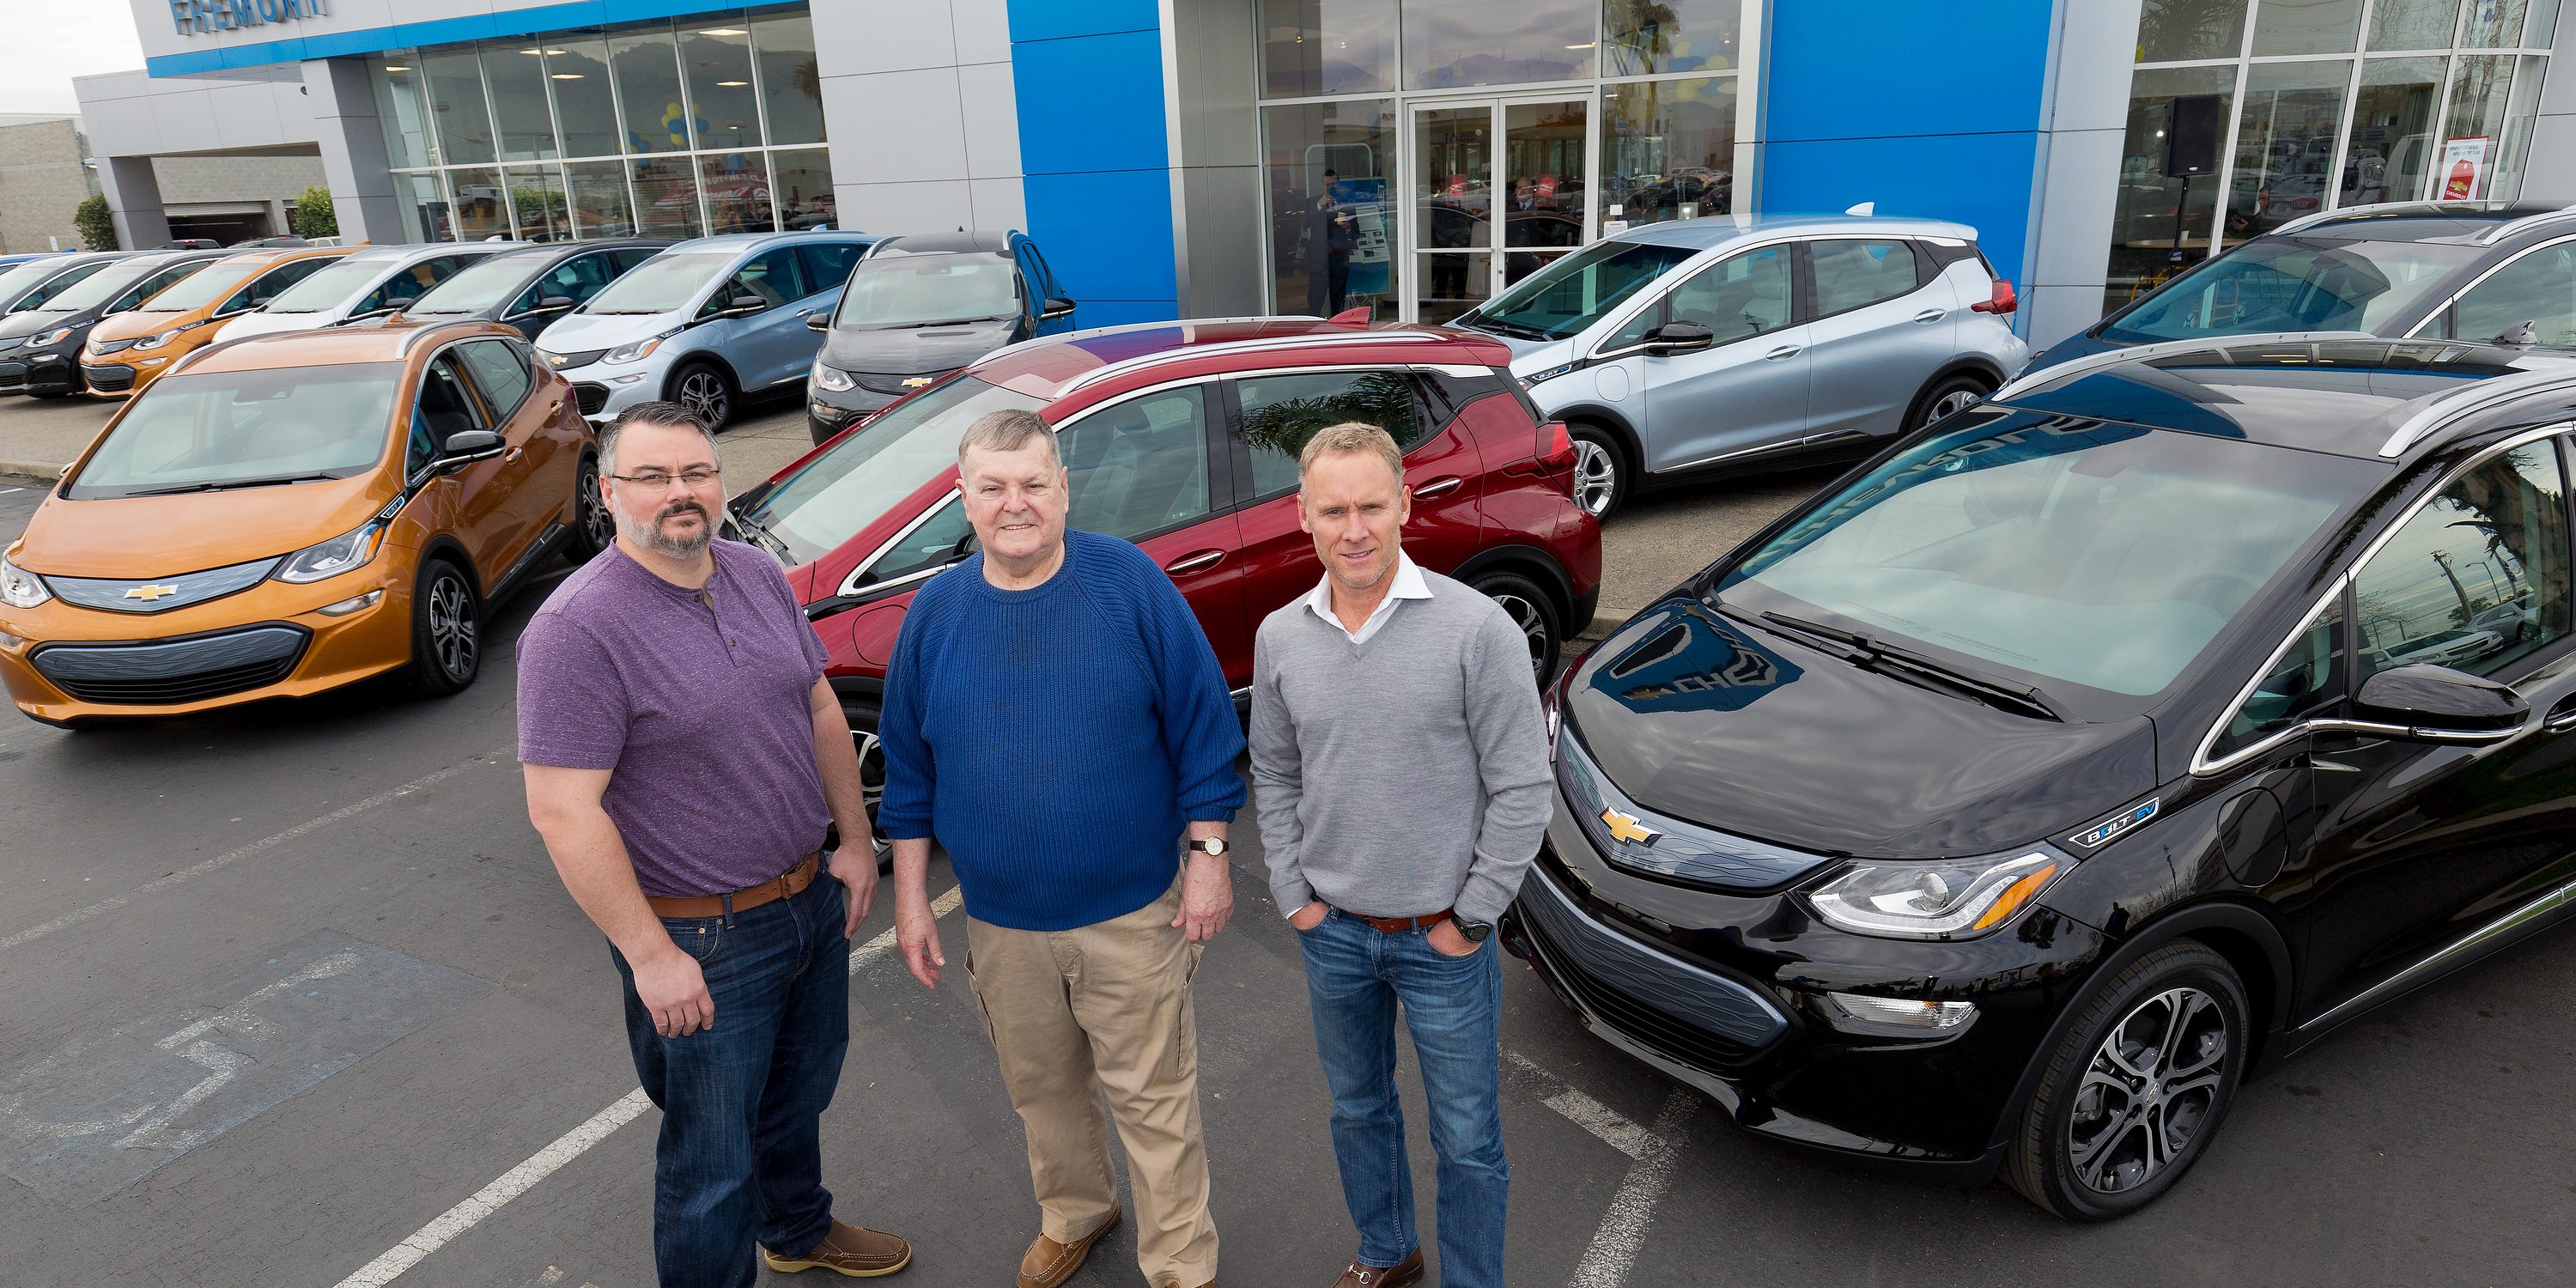 Customers Bobby Edmonds (l) of Castro Valley, CA, William “Bill” Mattos of Fremont, CA, and Steve Henry of Portola Valley, CA take delivery of the first three 2017 Chevrolet Bolt EVs Tuesday, December 13, 2016 at Fremont Chevrolet in Fremont, CA. The all-electric Bolt EV offers an EPA-estimated 238 miles of range on a full charge. (Photo by Martin Klimek for Chevrolet)